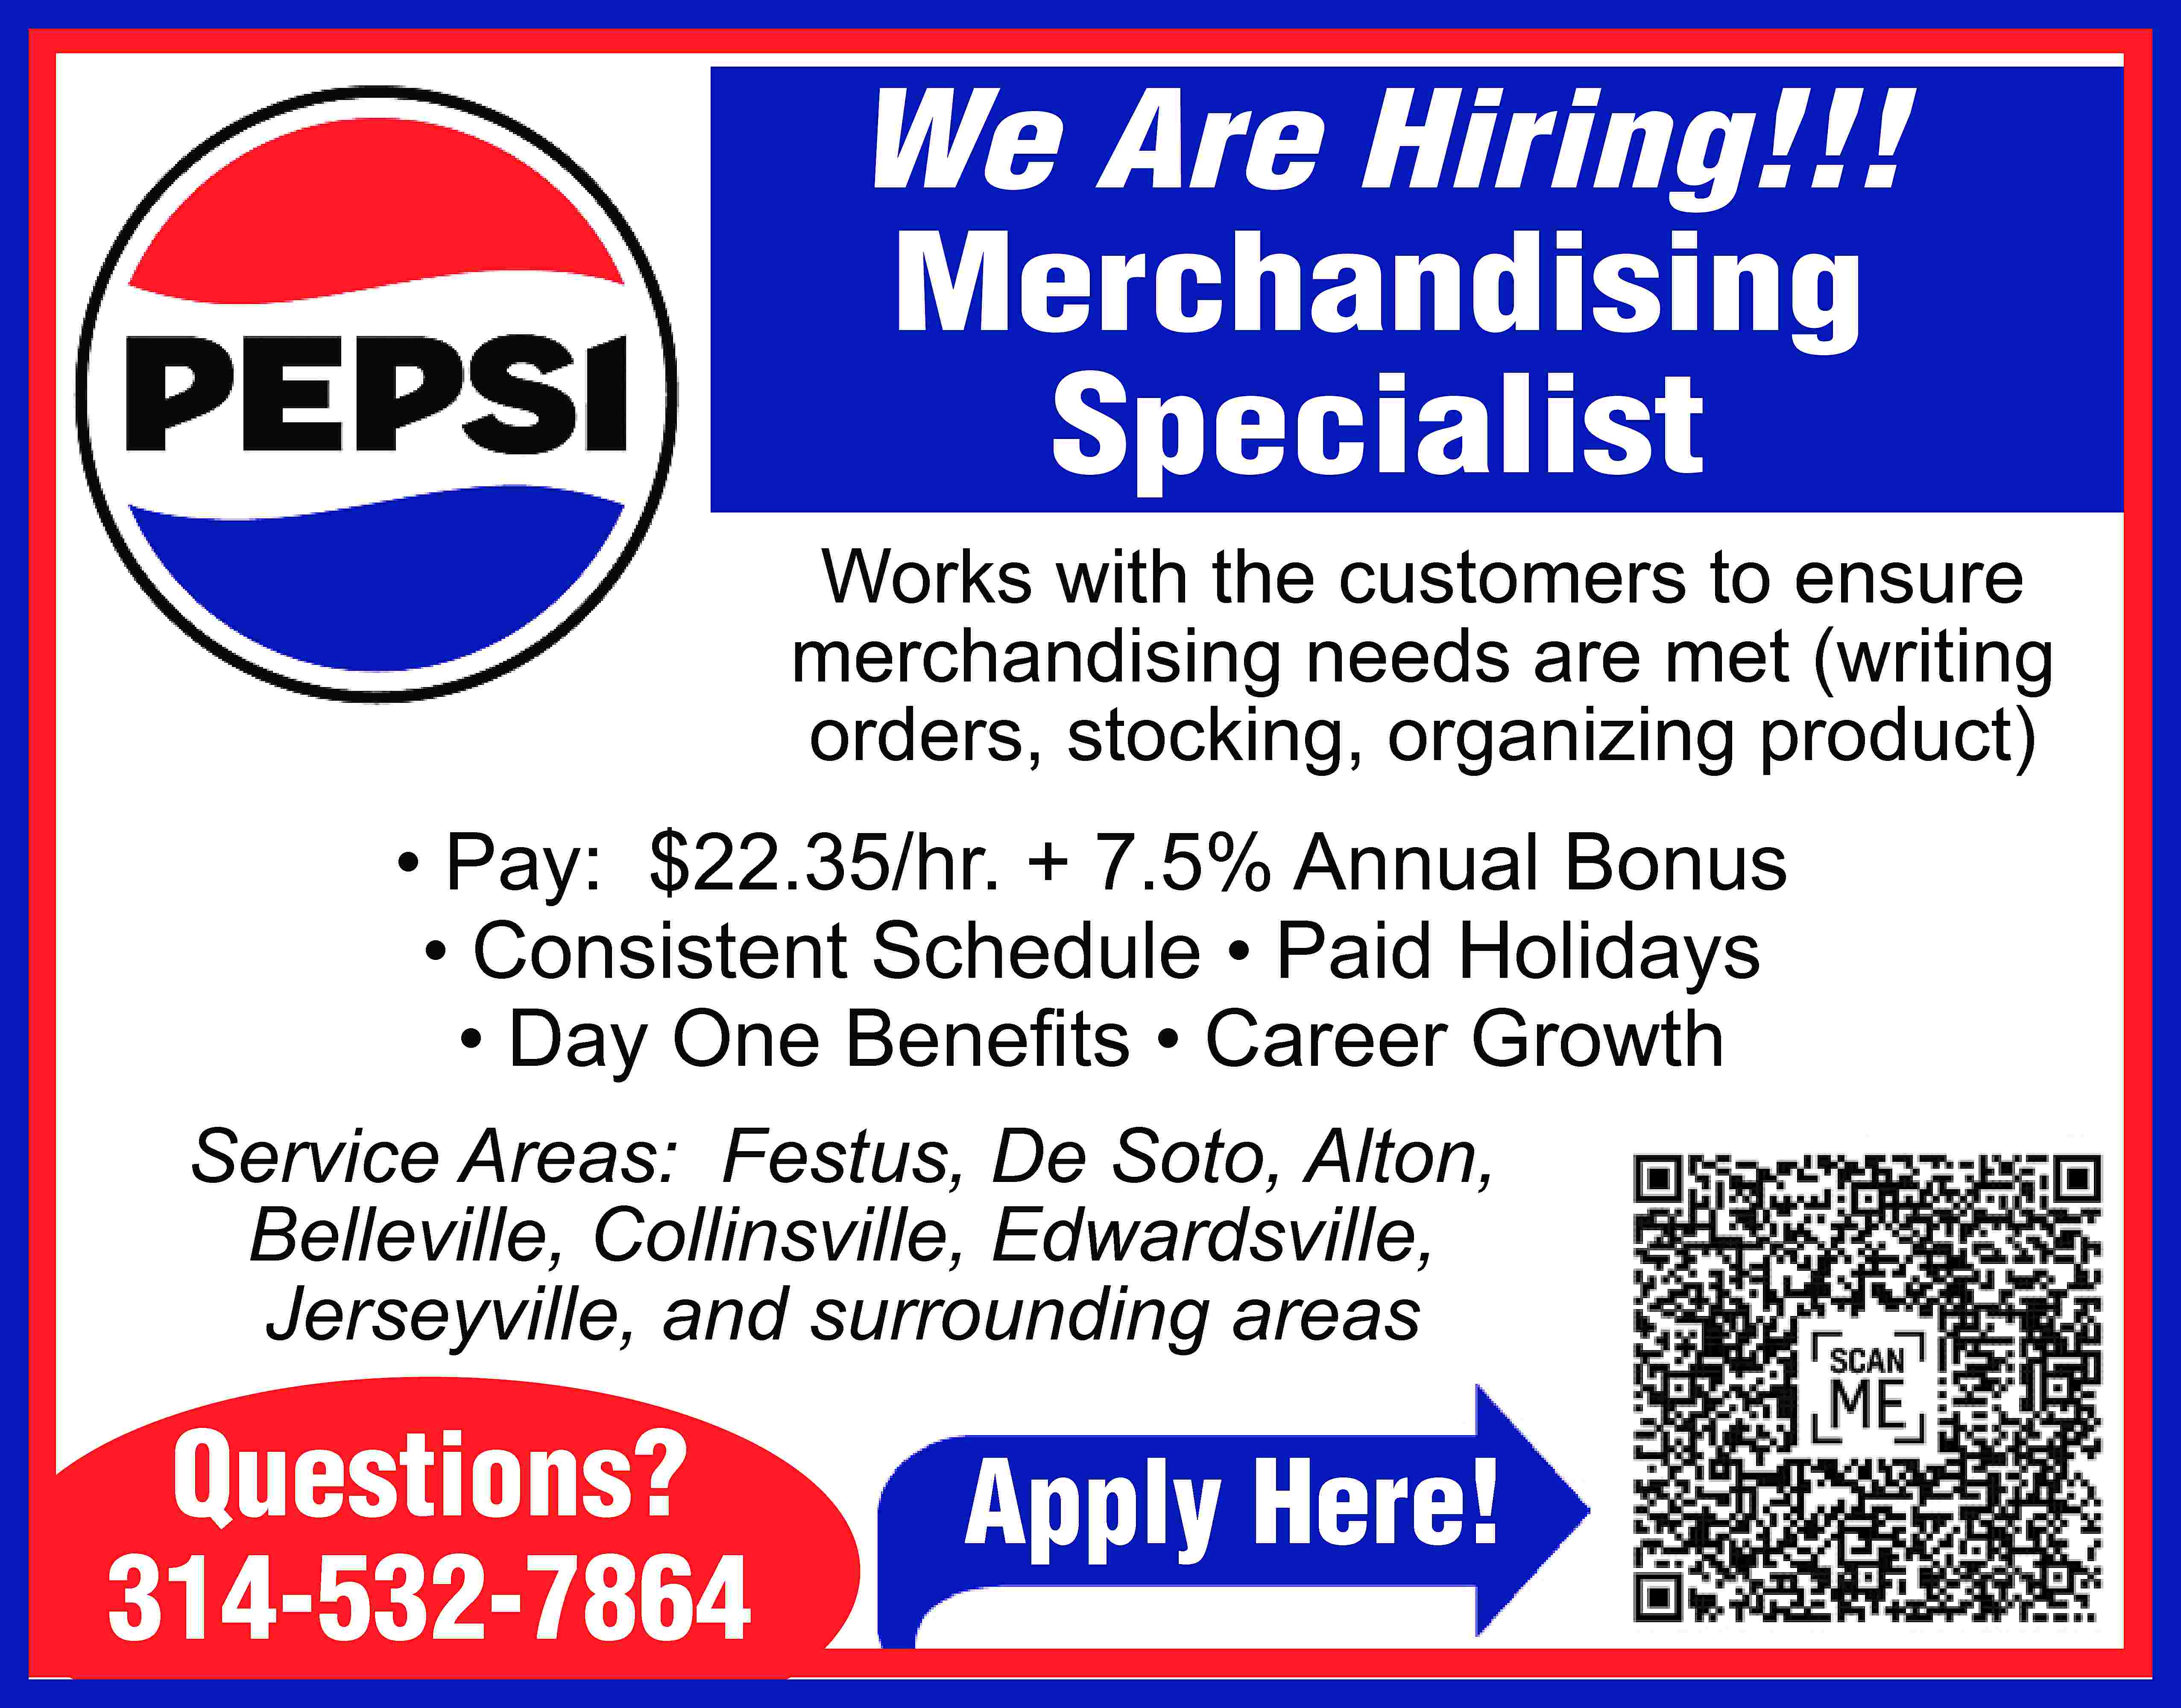 We Are Hiring!!! Merchandising Specialist  We Are Hiring!!! Merchandising Specialist Works with the customers to ensure merchandising needs are met (writing orders, stocking, organizing product) • Pay: $22.35/hr. + 7.5% Annual Bonus • Consistent Schedule • Paid Holidays • Day One Beneﬁts • Career Growth Service Areas: Festus, De Soto, Alton, Belleville, Collinsville, Edwardsville, Jerseyville, and surrounding areas Questions? 314-532-7864 Apply Here!